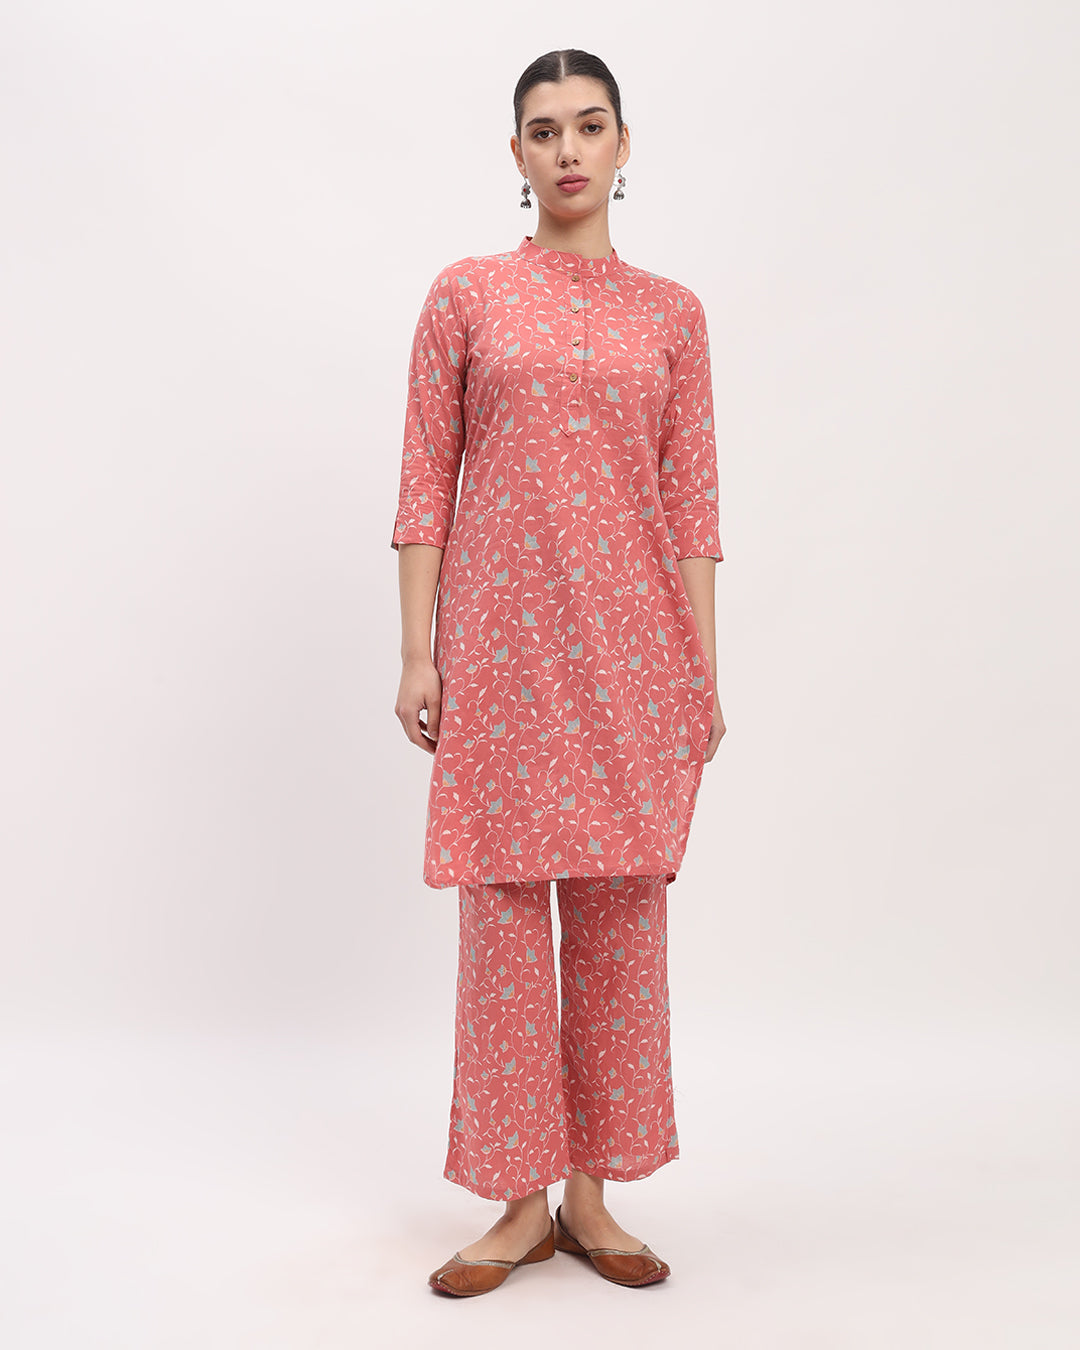 Combo: English Floral Garden & Maple Leaf Band Collar Neck Printed Kurta (Without Bottoms)